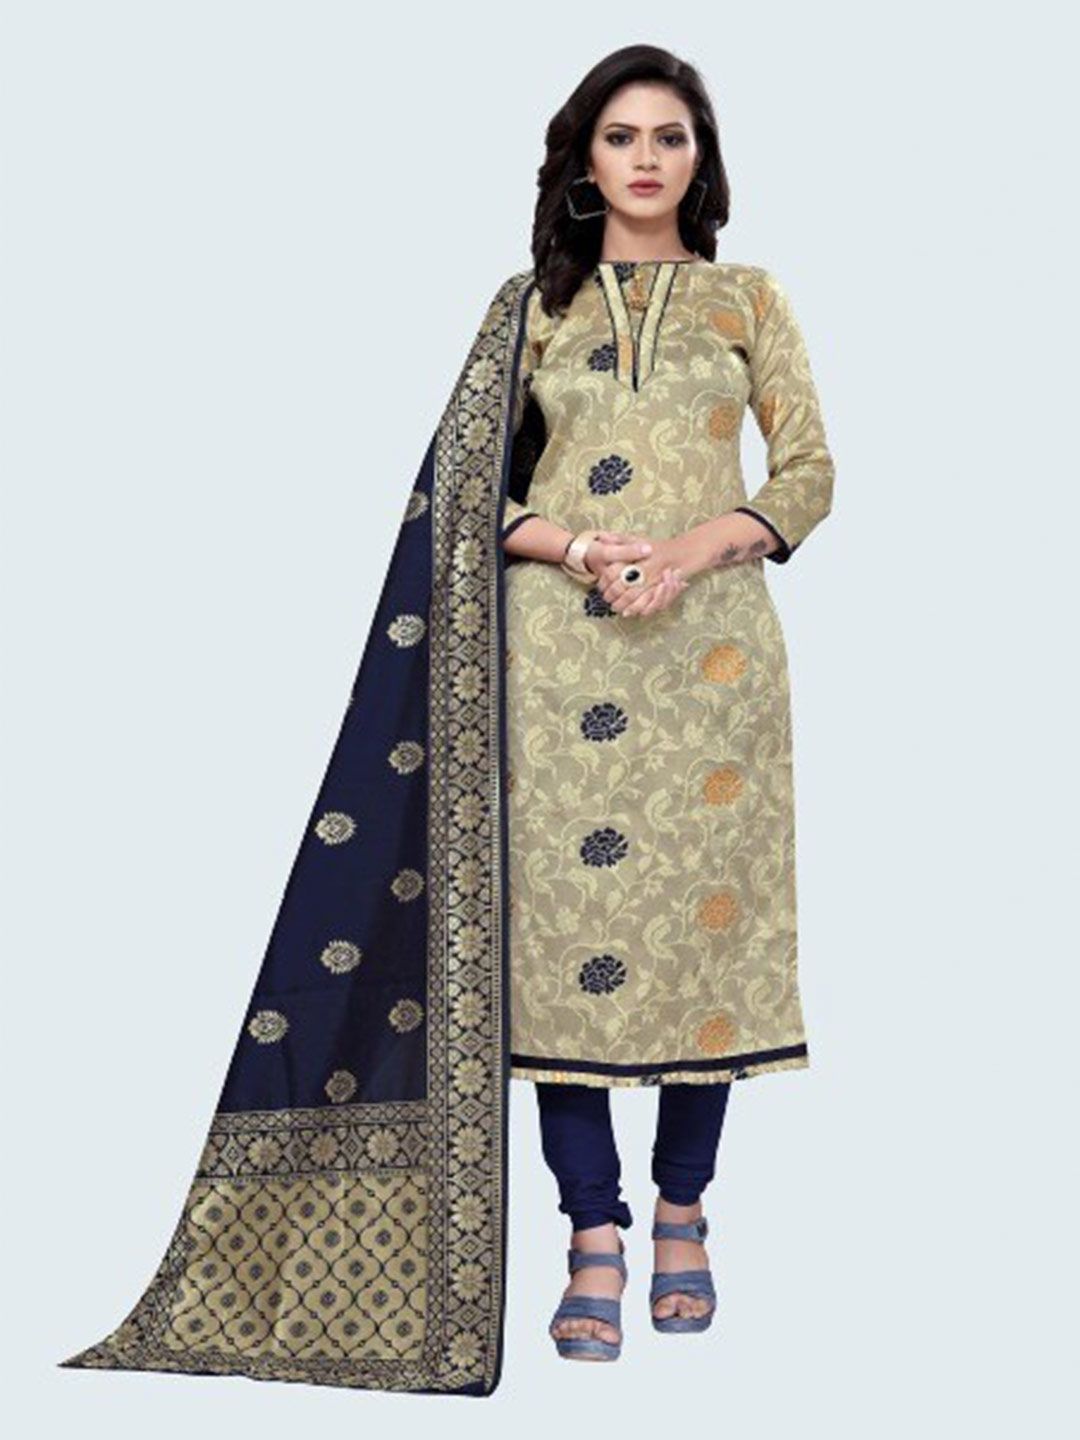 MORLY Beige & Blue Woven Design Dupion Silk Unstitched Dress Material Price in India